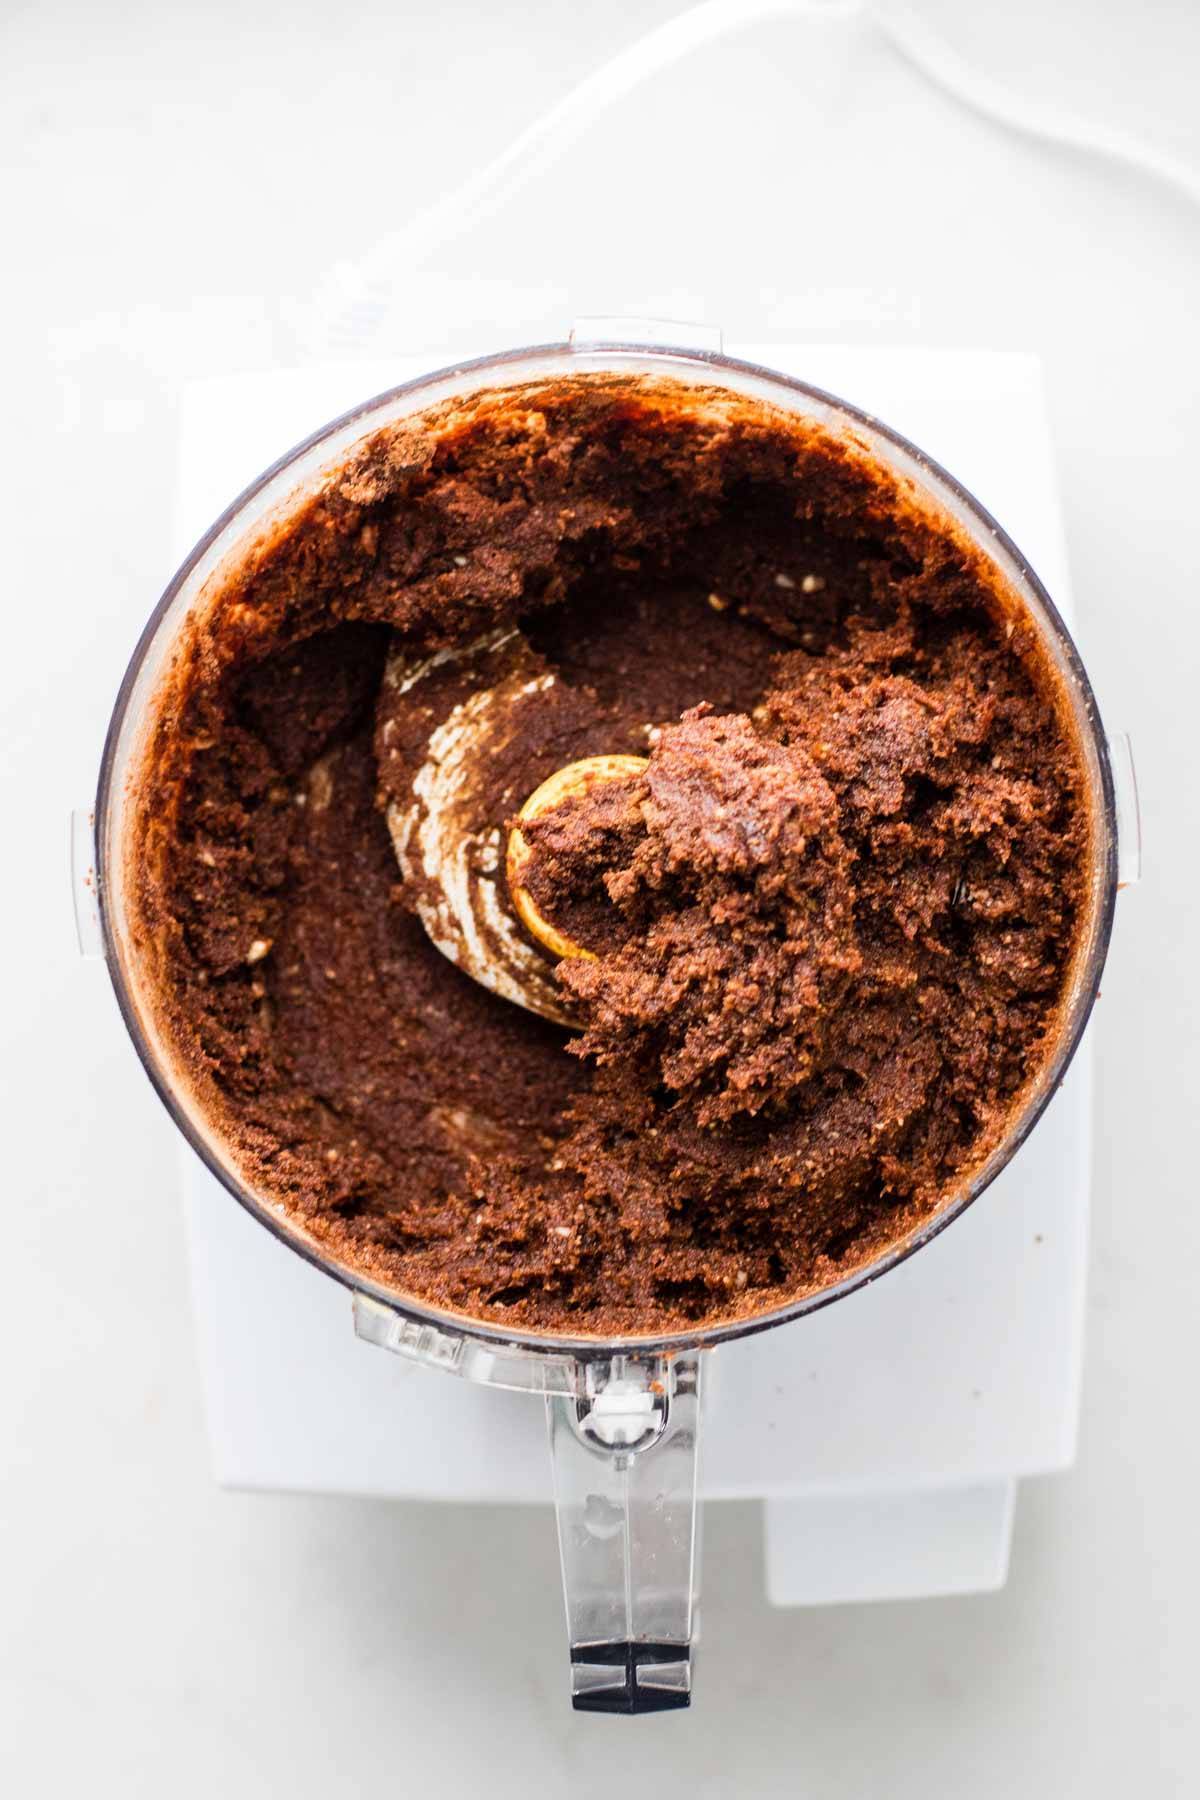 Chocolate in a food processor.